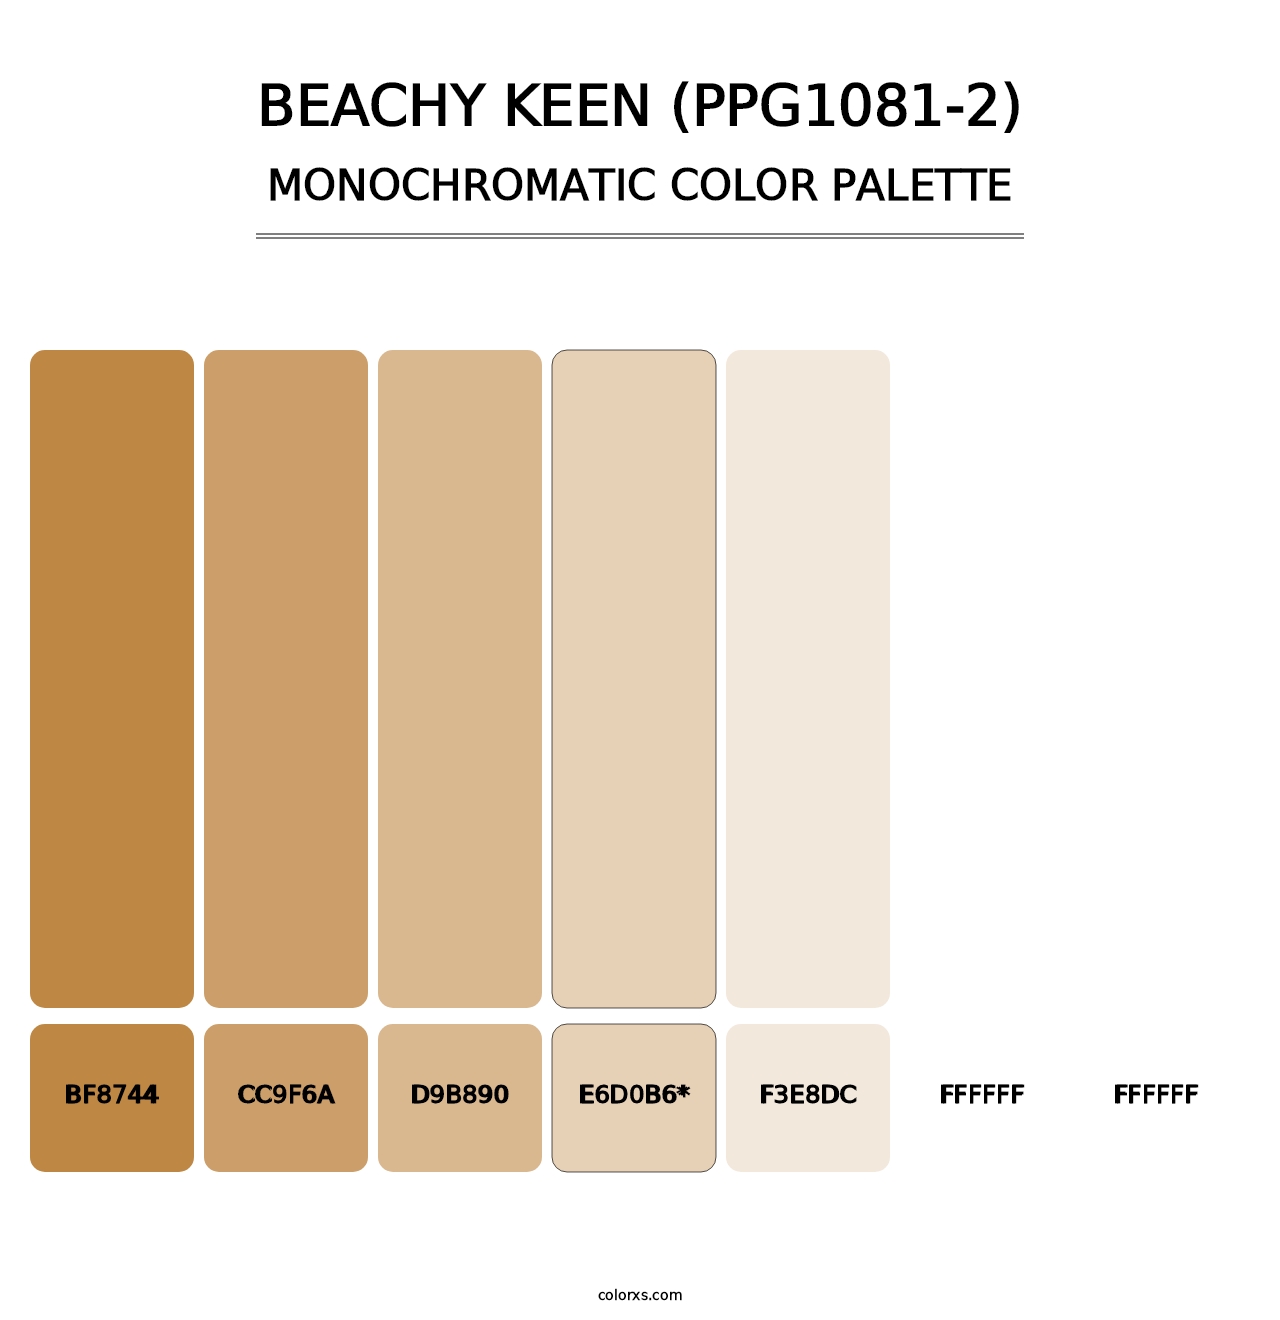 Beachy Keen (PPG1081-2) - Monochromatic Color Palette